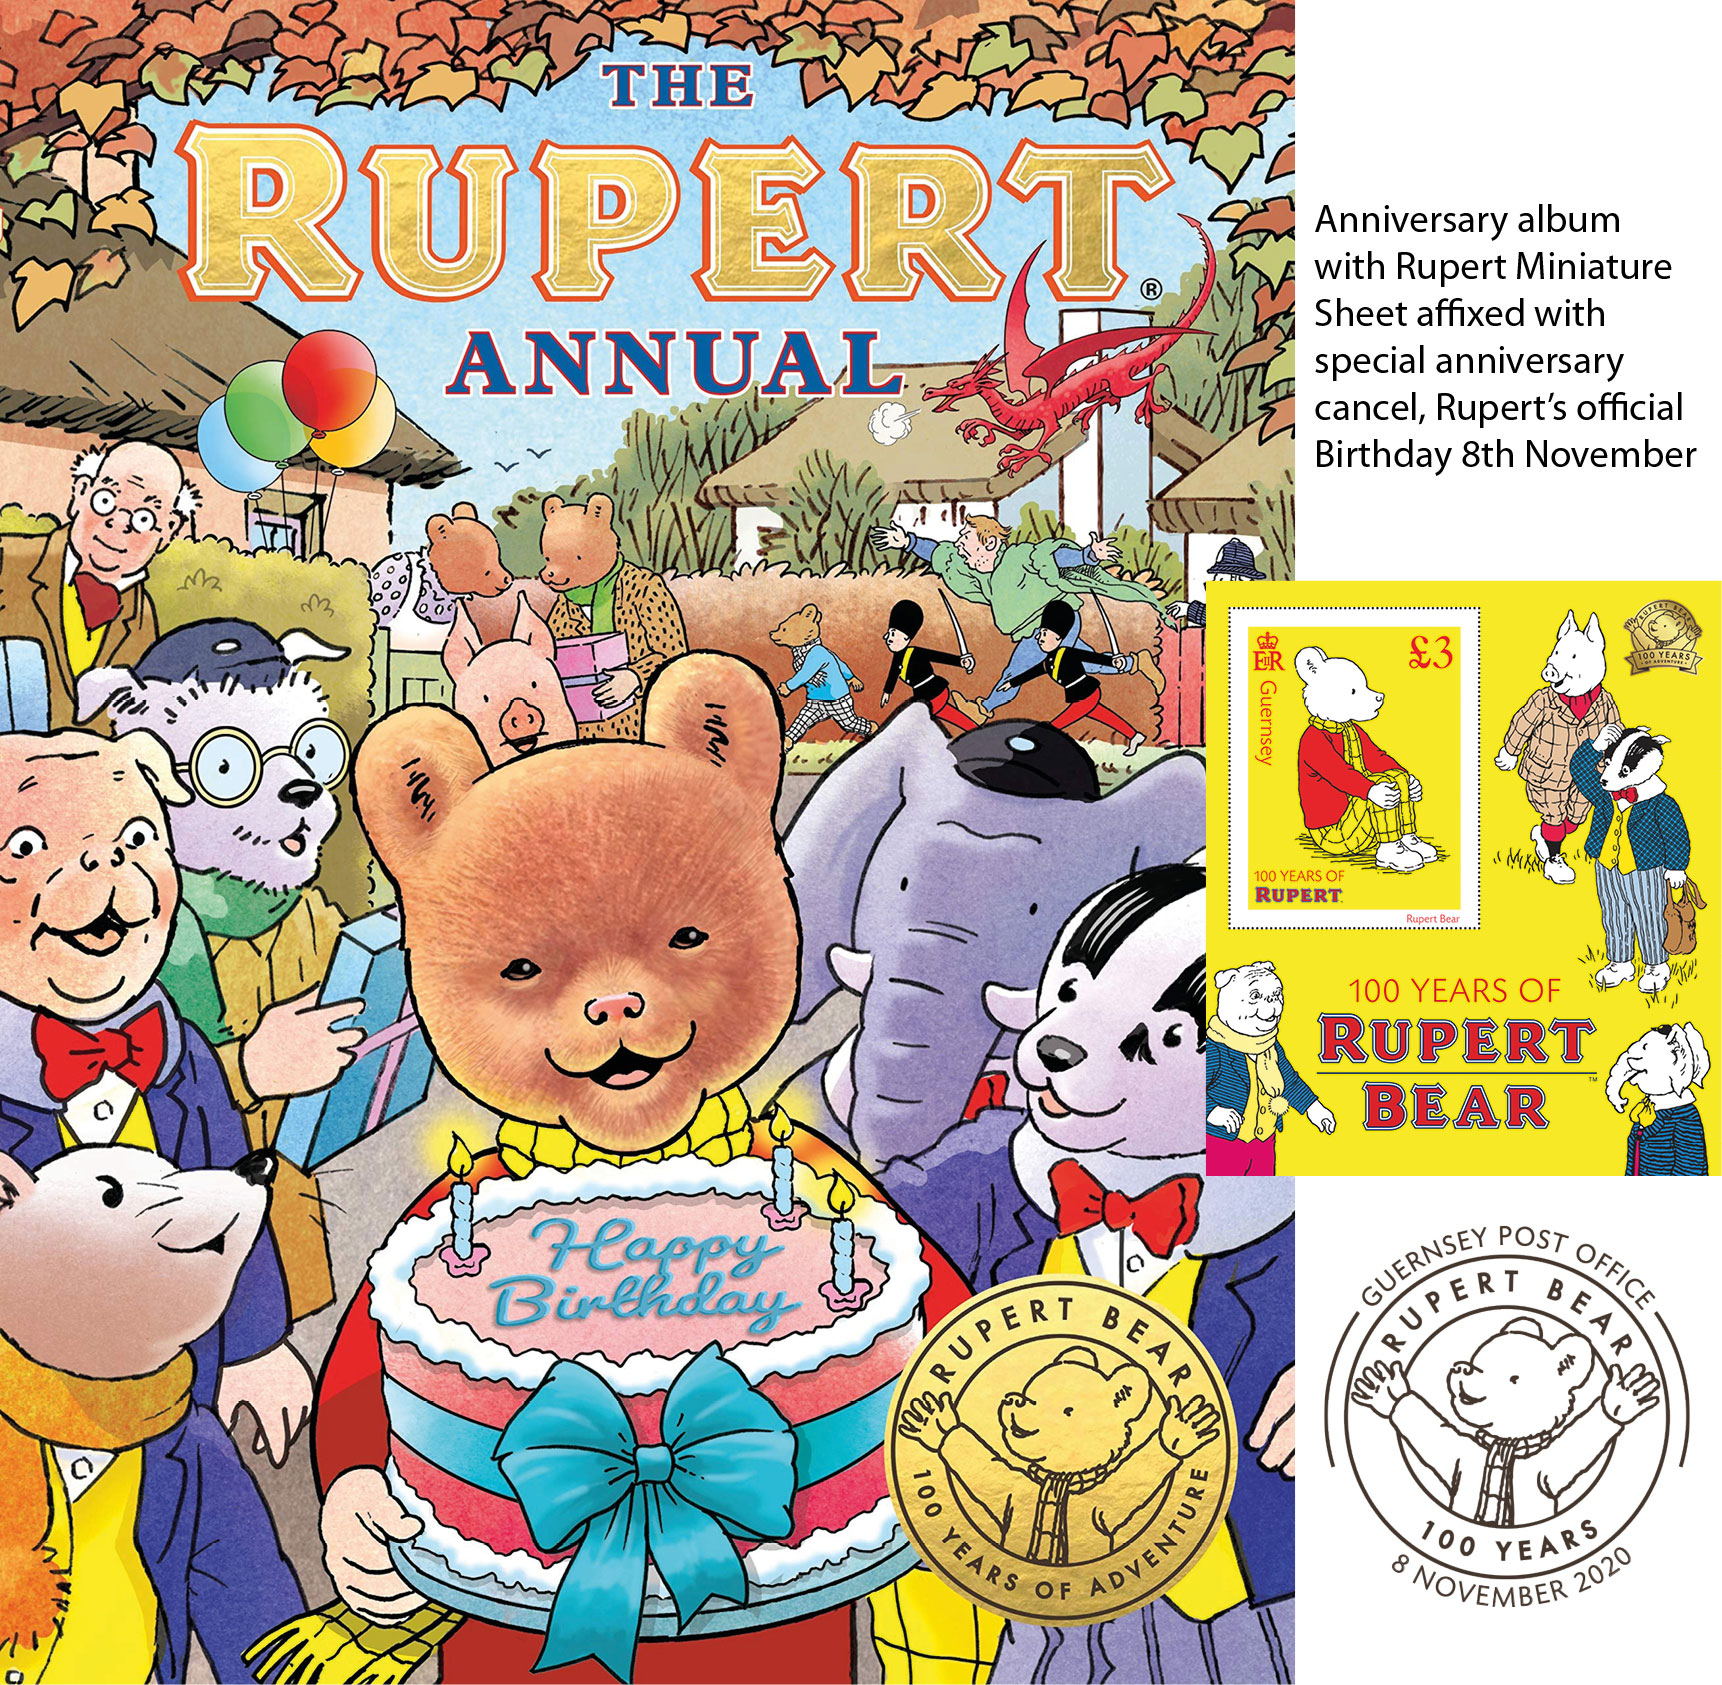 Rupert 100th Anniversary Annual with Miniature Sheet